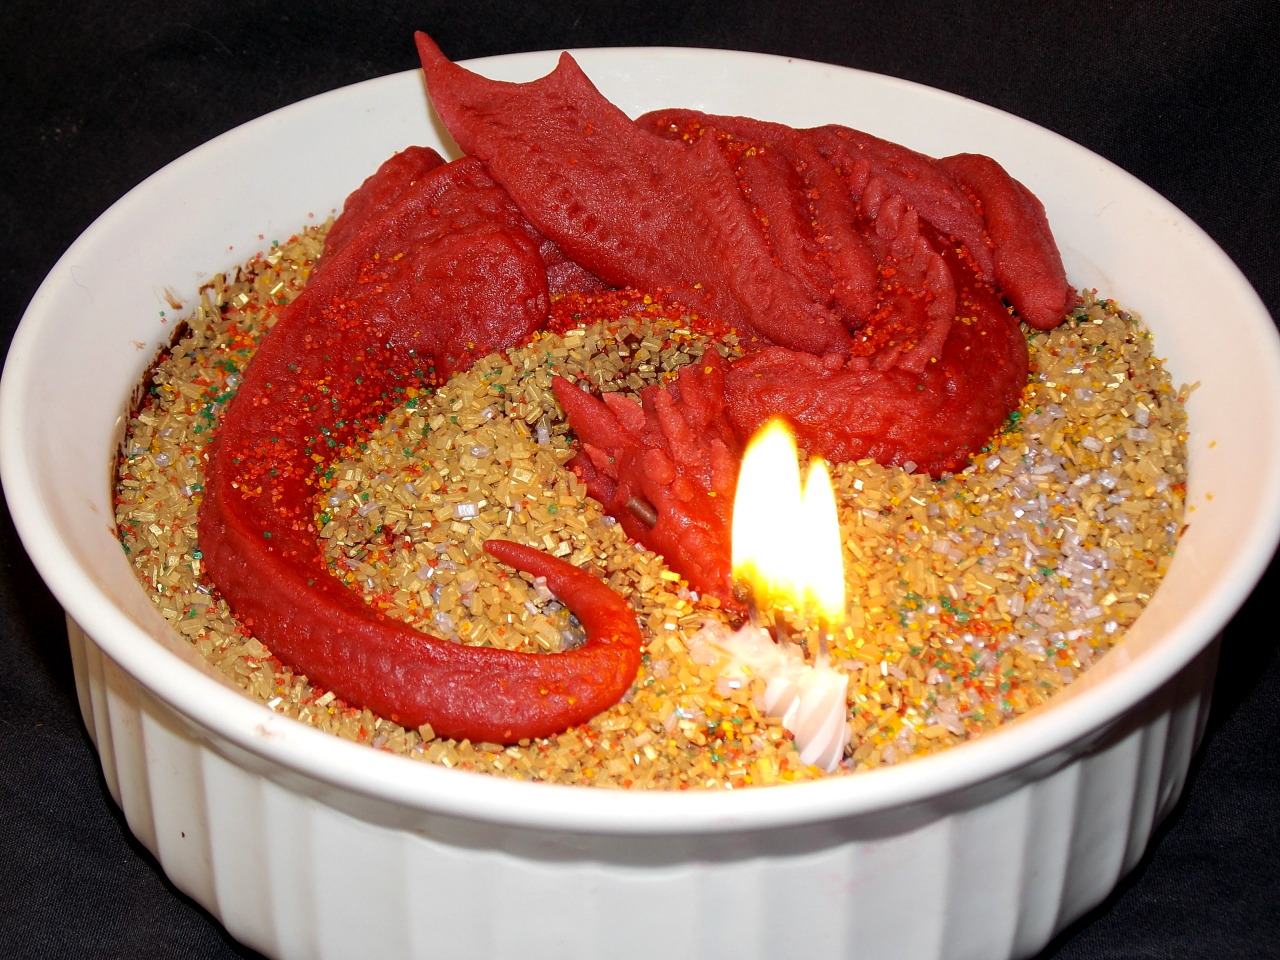 Marzipan Smaug atop a treasure of golden sprinkles and rich chocolate souffle. As fun to eat as he was to make!